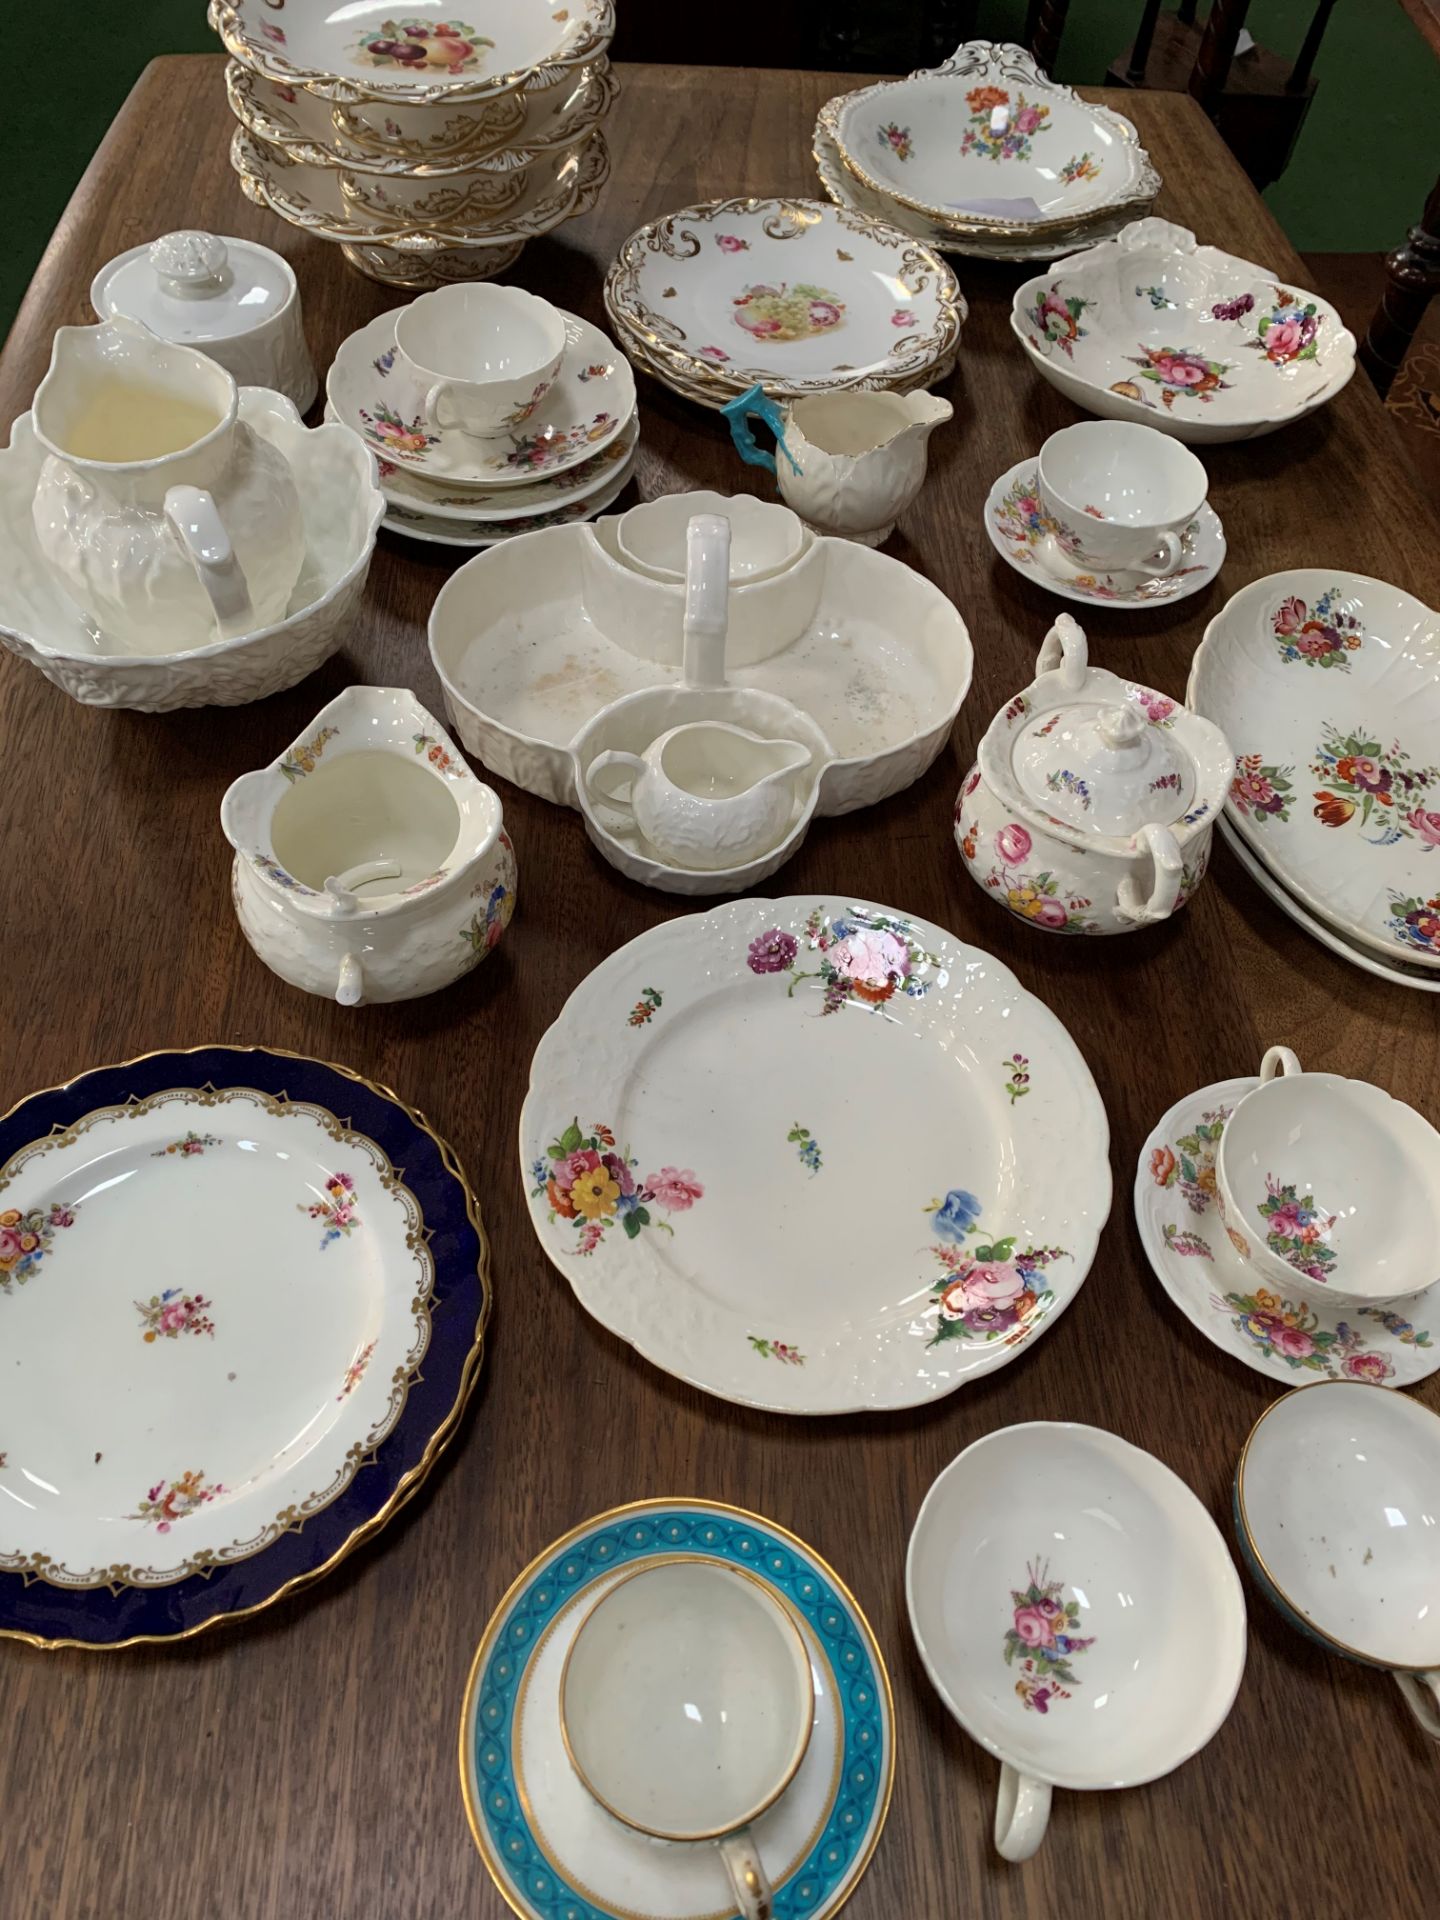 Collection of mainly Coalport china, plus Longport mid-19th century plates